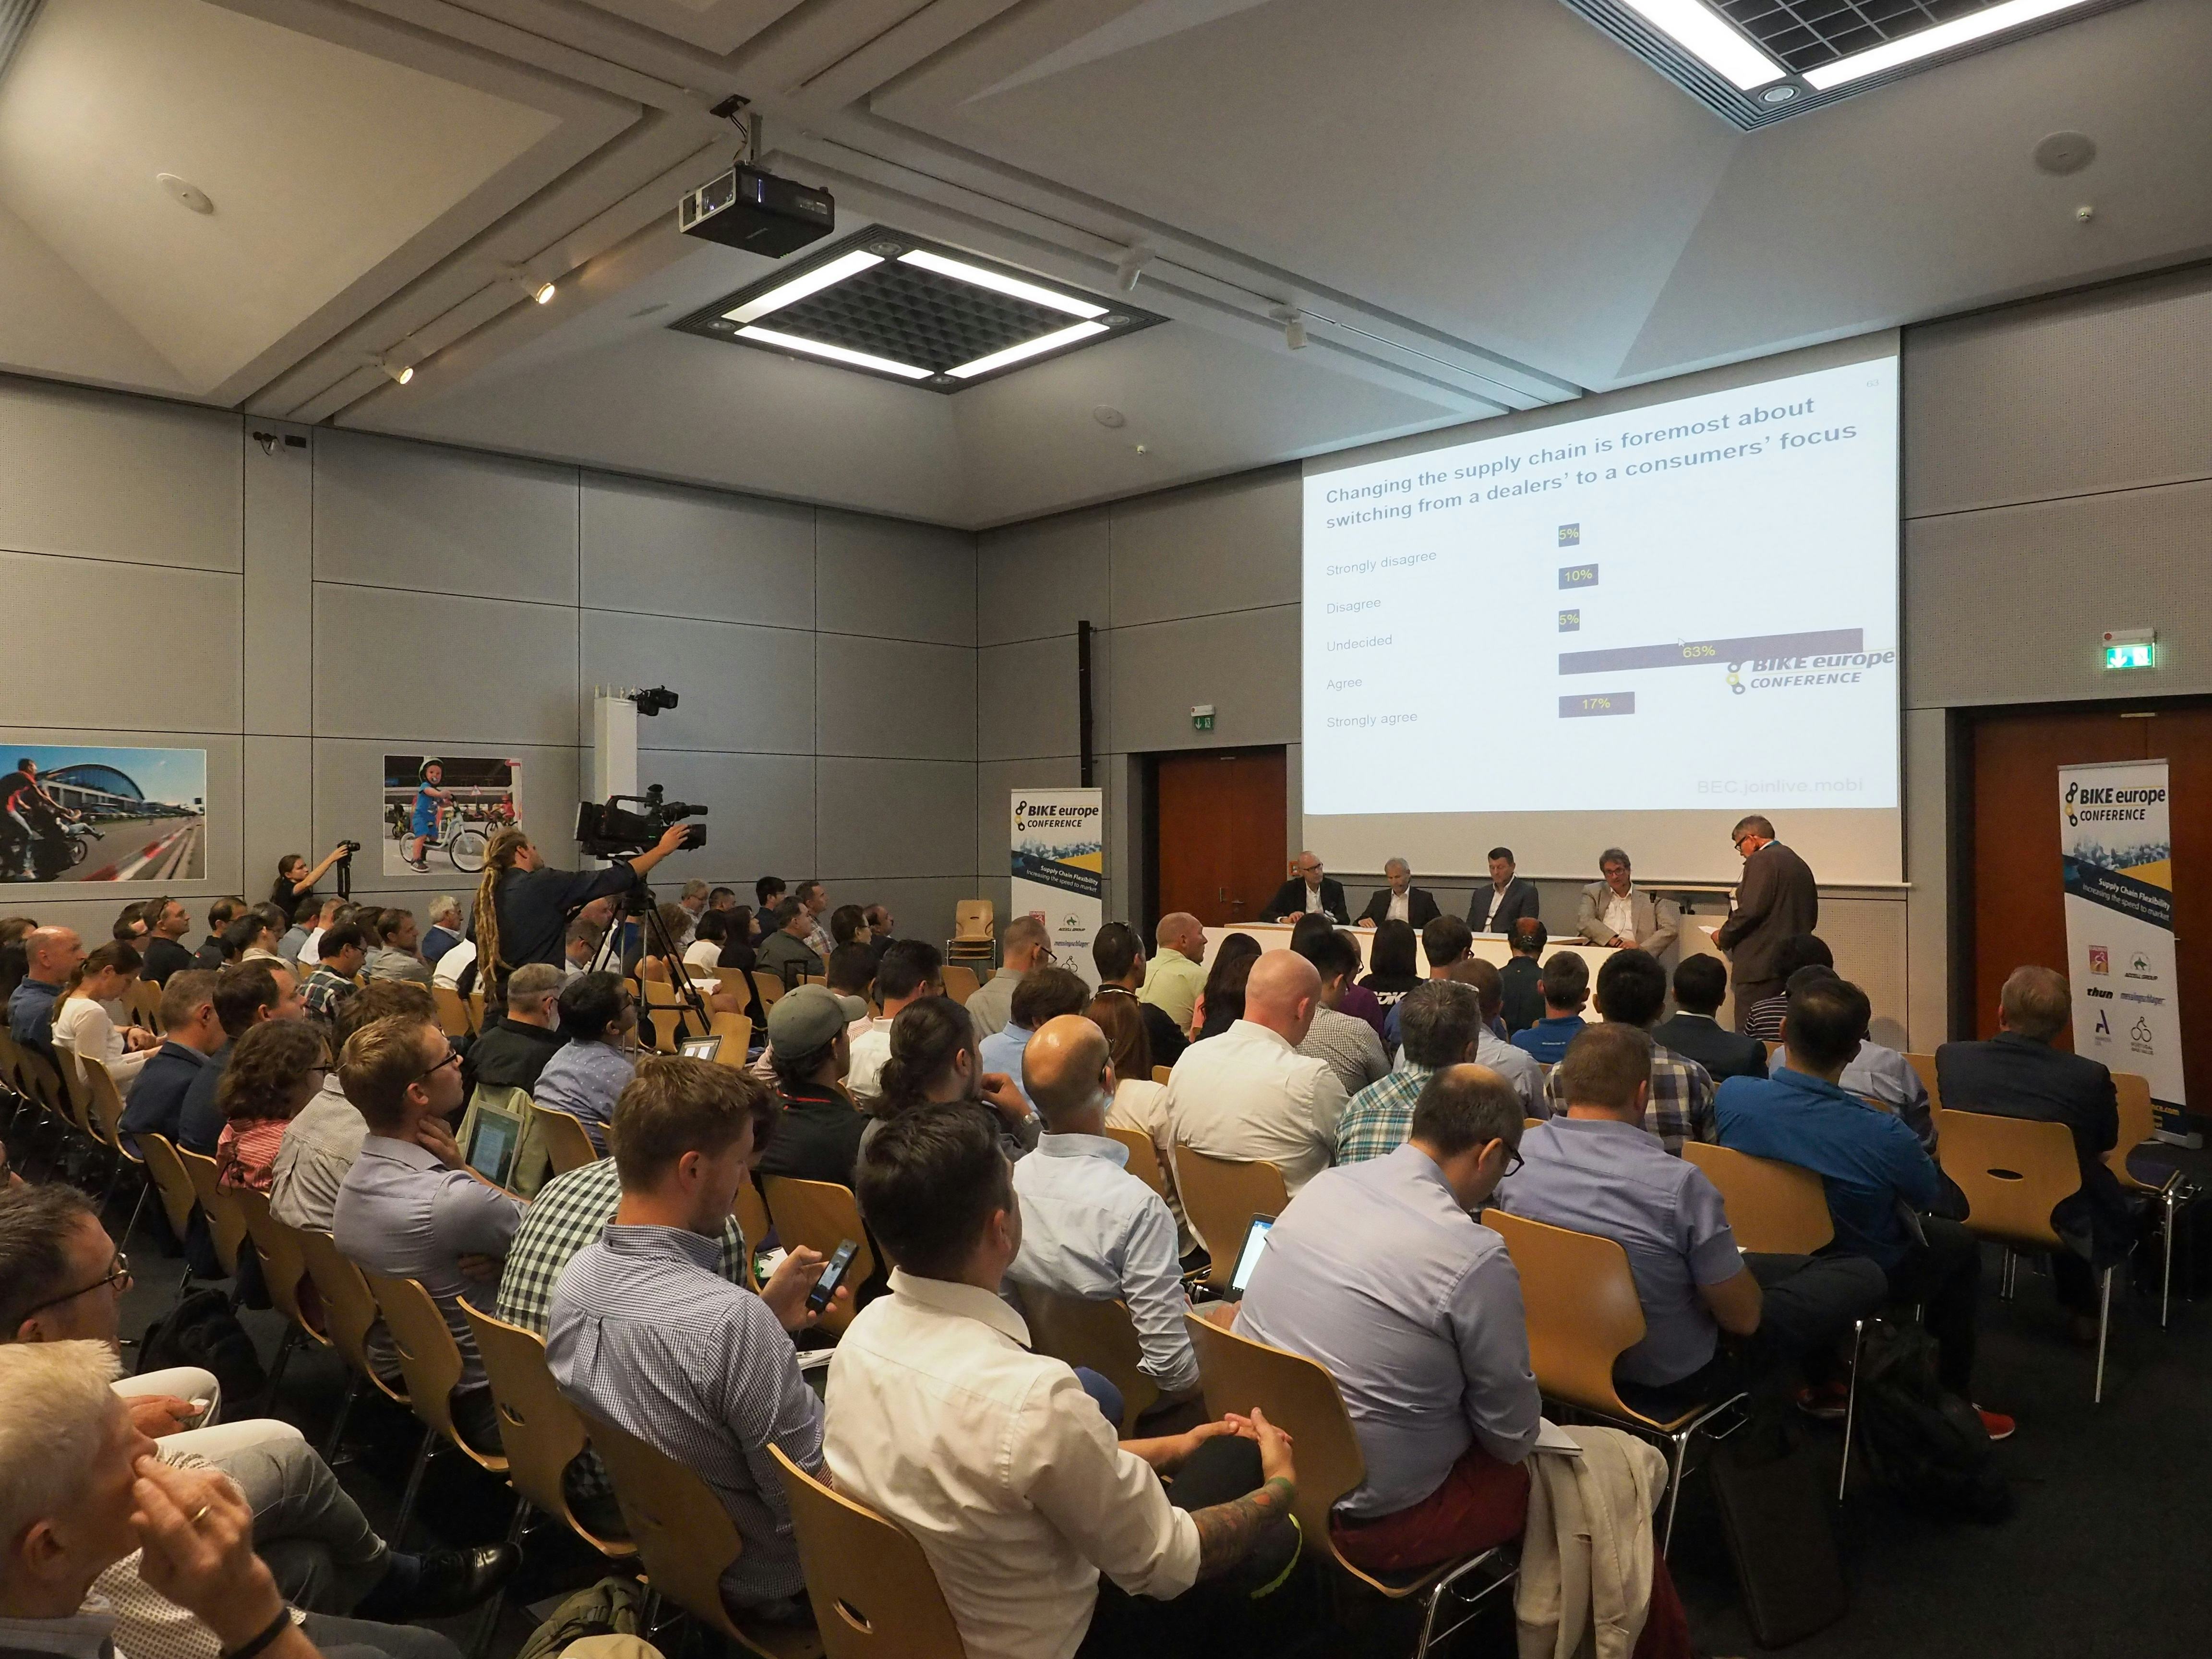 Full house today at Bike Europe’s Supply Chain - increase speed to market - Conference. – Photo Bike Europe